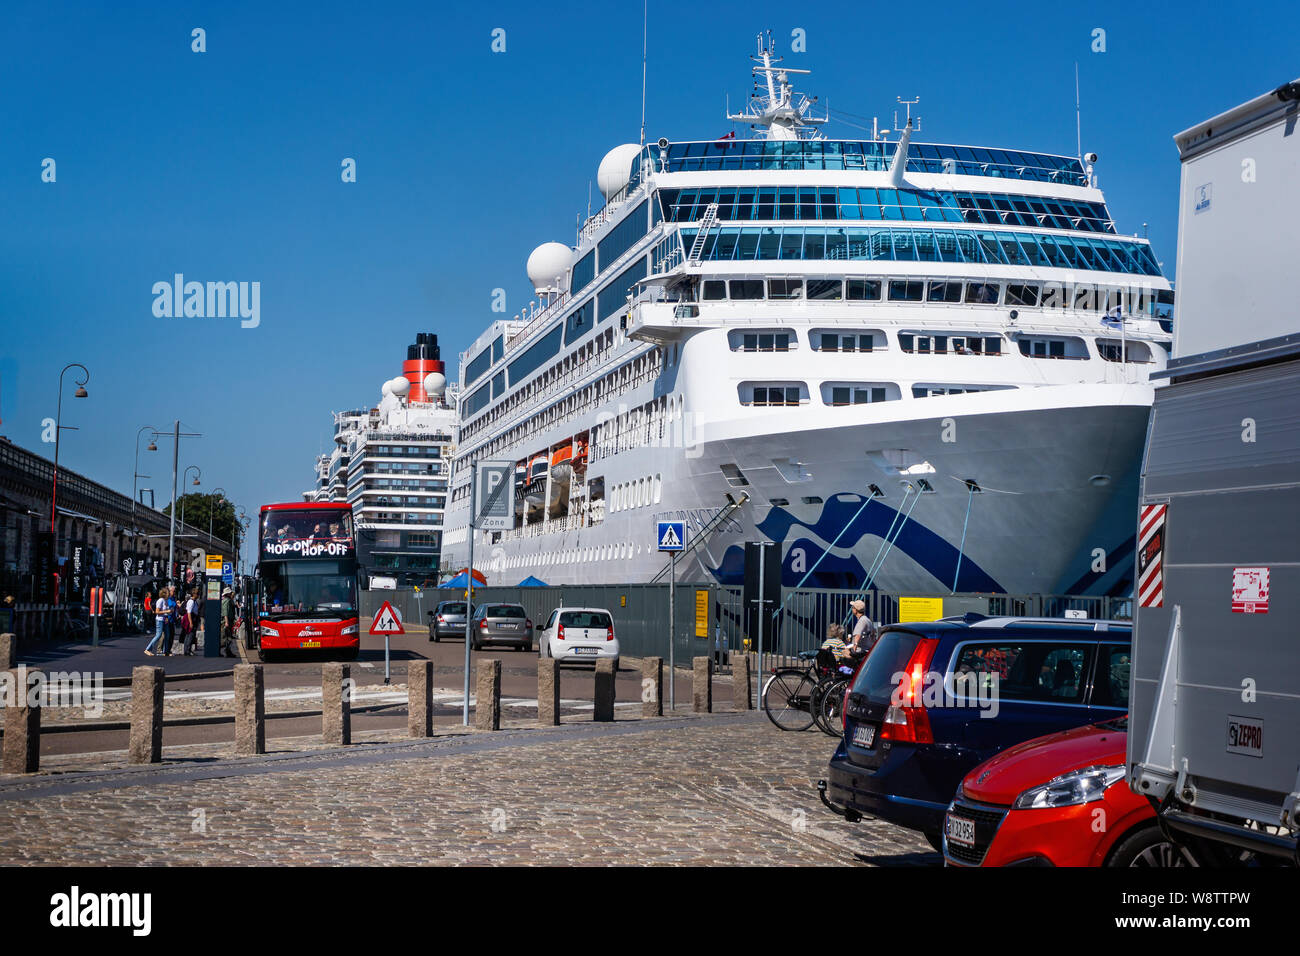 Pair of large Cruise Ships including Cunards Queen Victoria moored at Copenhagen, Denmark with hop on hop off tour bus on 18 July 2019 Stock Photo